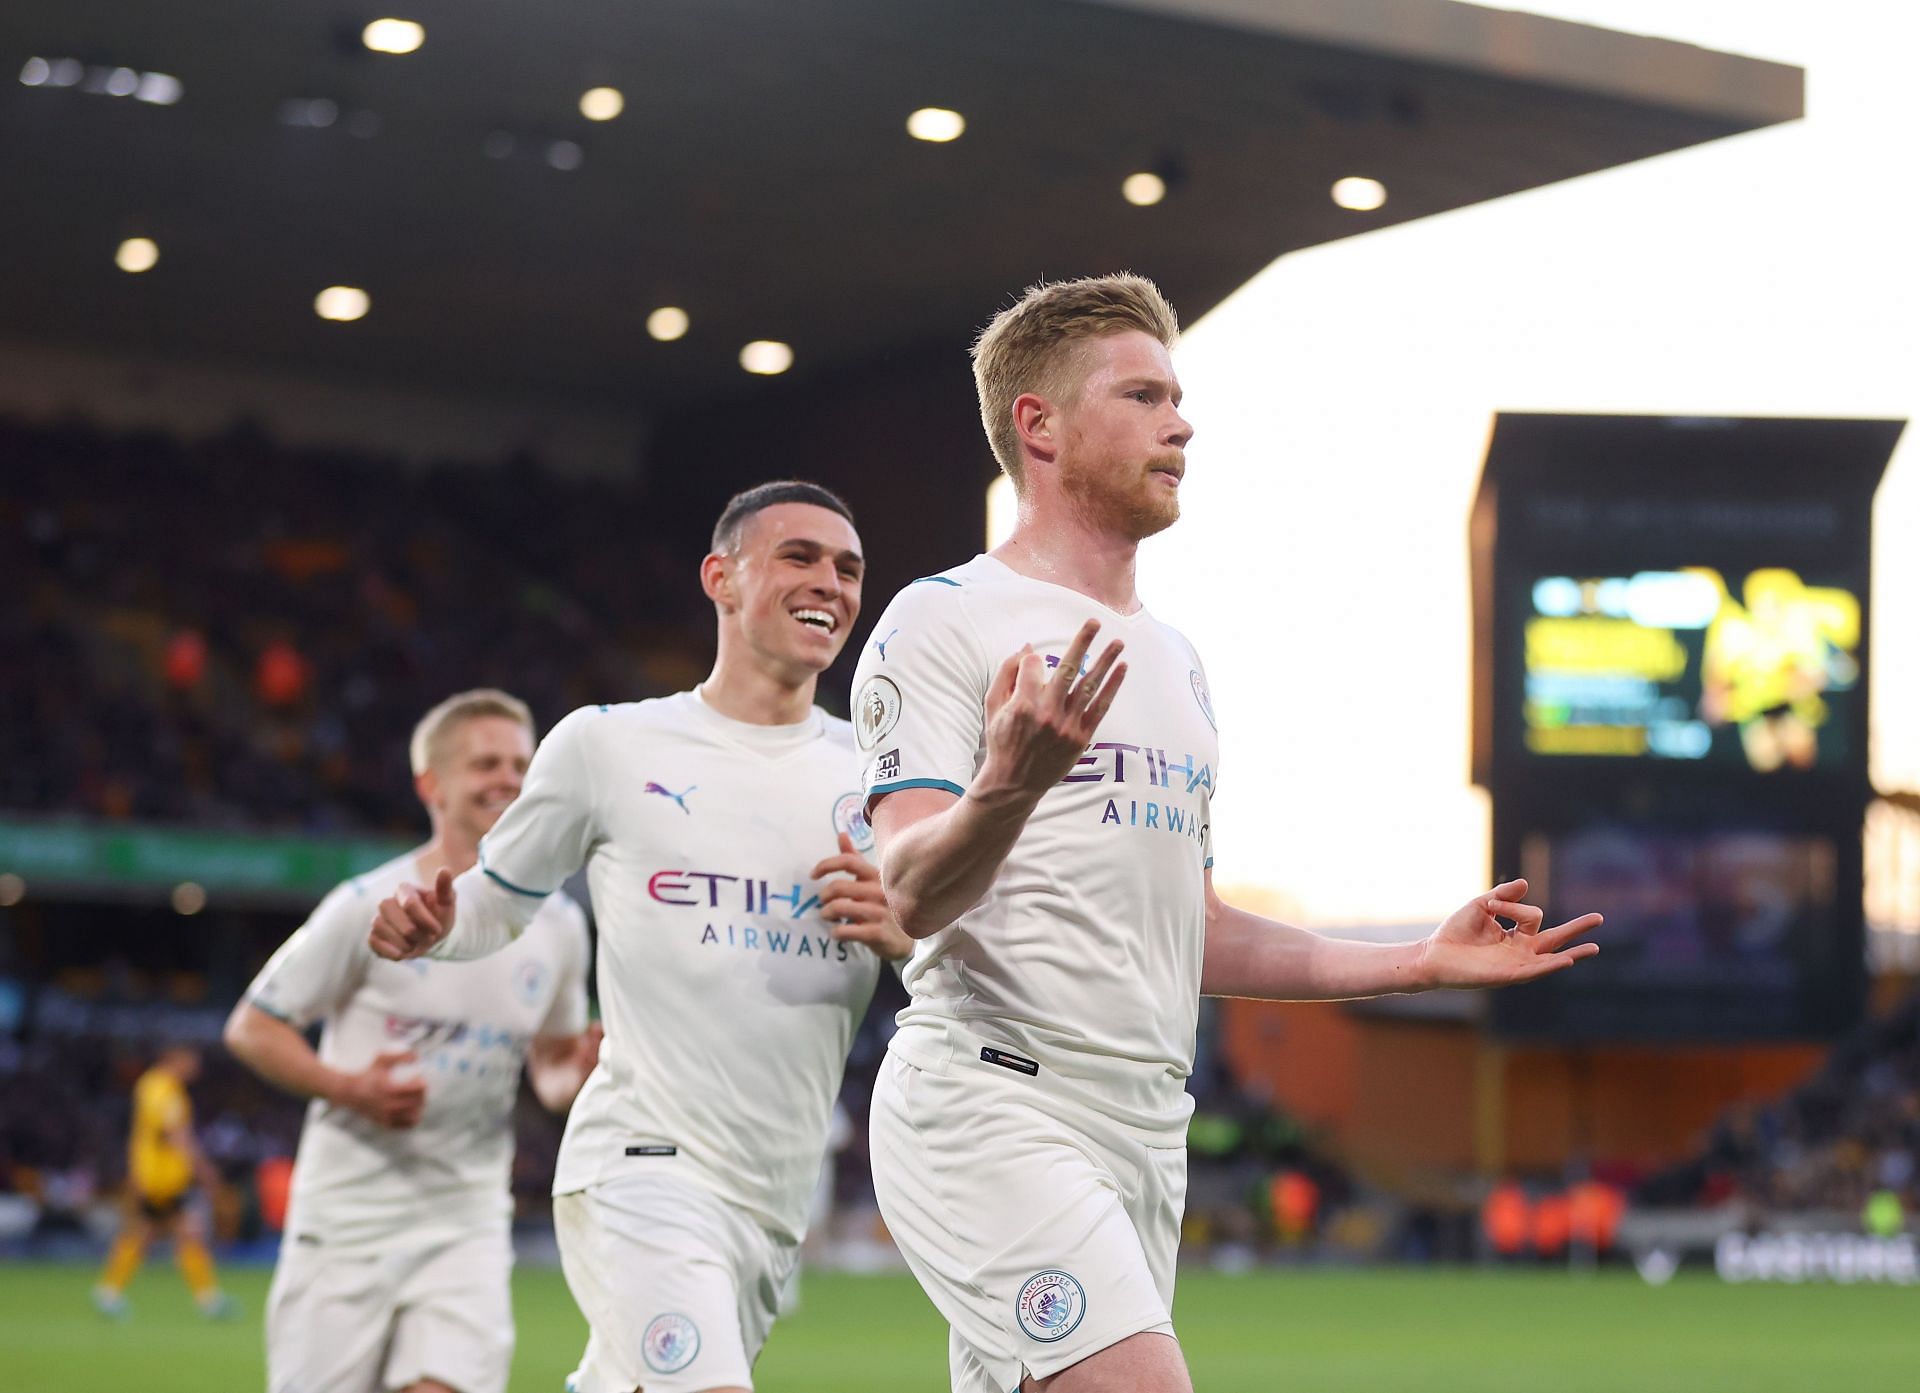 Kevin De Bruyne inspired Manchester City to a crucial win over Wolverhampton Wanderers